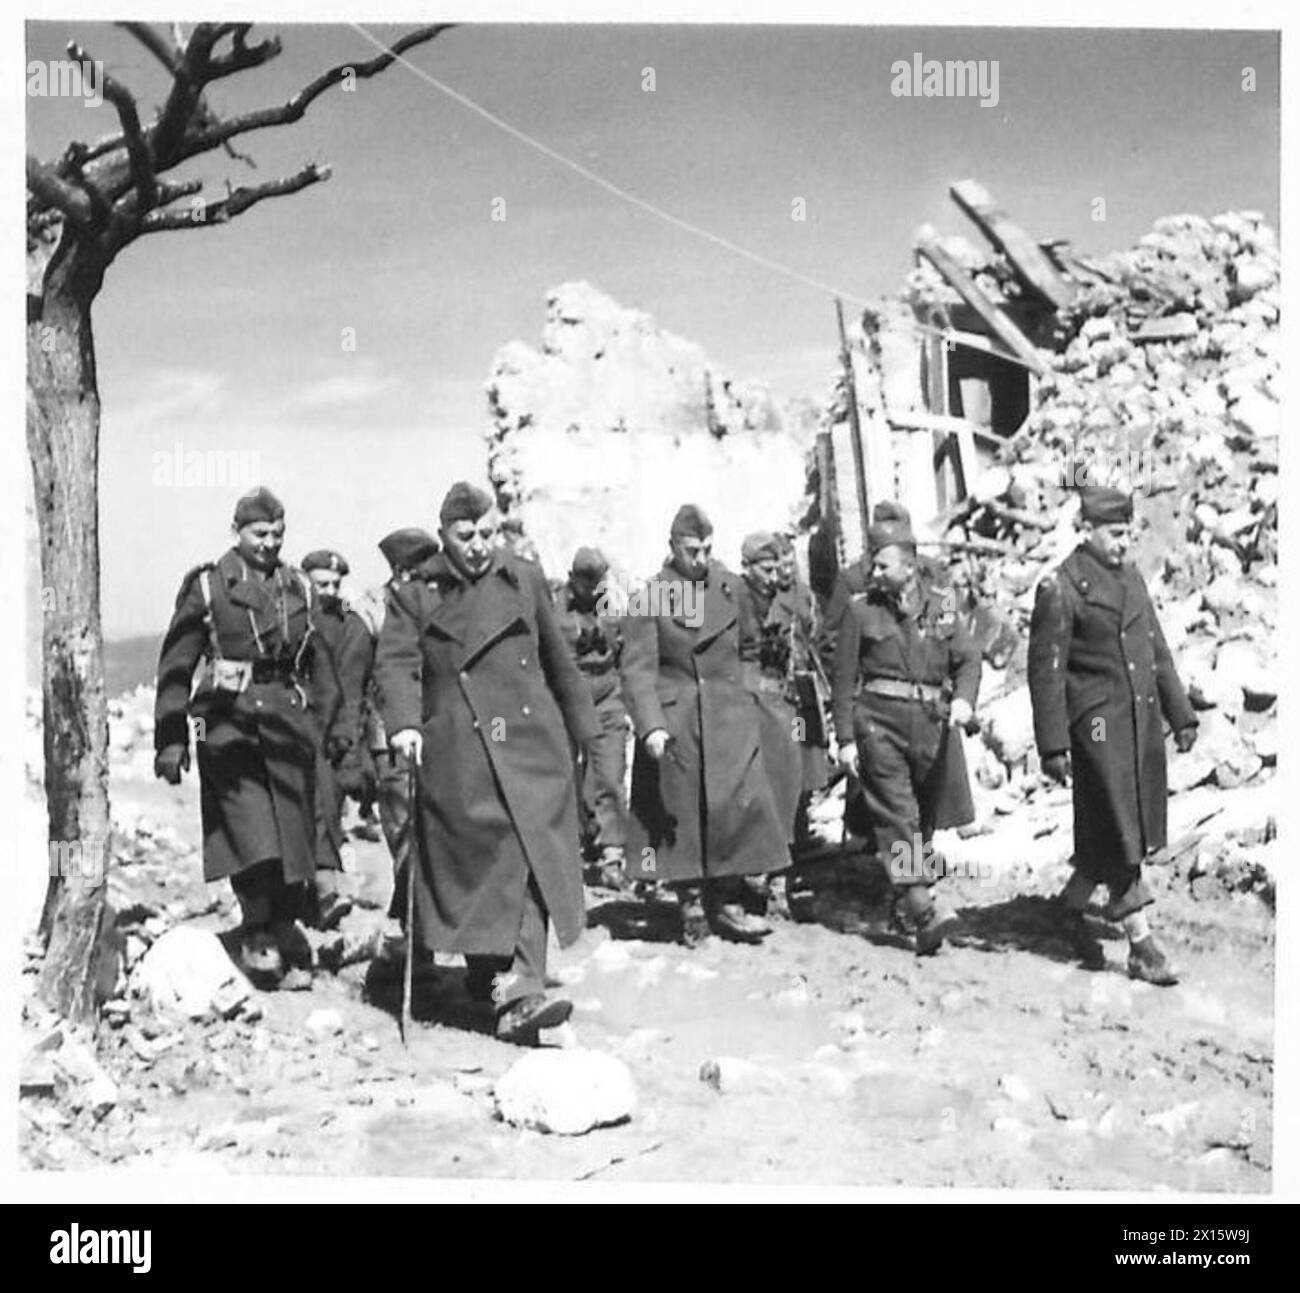 THE POLISH ARMY IN THE ITALIAN CAMPAIGN, 1943-1945 - Archbishop Józef Gawlina, the Chief Chaplain of the Polish Armed Forces, is on the left (with a walking stick). Generals Stanisław Kopański, the Chief of the Polish General Staff, and Bolesław Duch, the Commander of the Division, are both on the far right. General Kazimierz Sosnkowski, the C-in-C of the Polish Armed Forces, and his party walking through ruins of San Pietro Avellana during his visit to various units of the 3rd Carpathian Rifles Division (2nd Polish Corps), 28/29 March 1944 Polish Army, Polish Armed Forces in the West, Polish Stock Photo